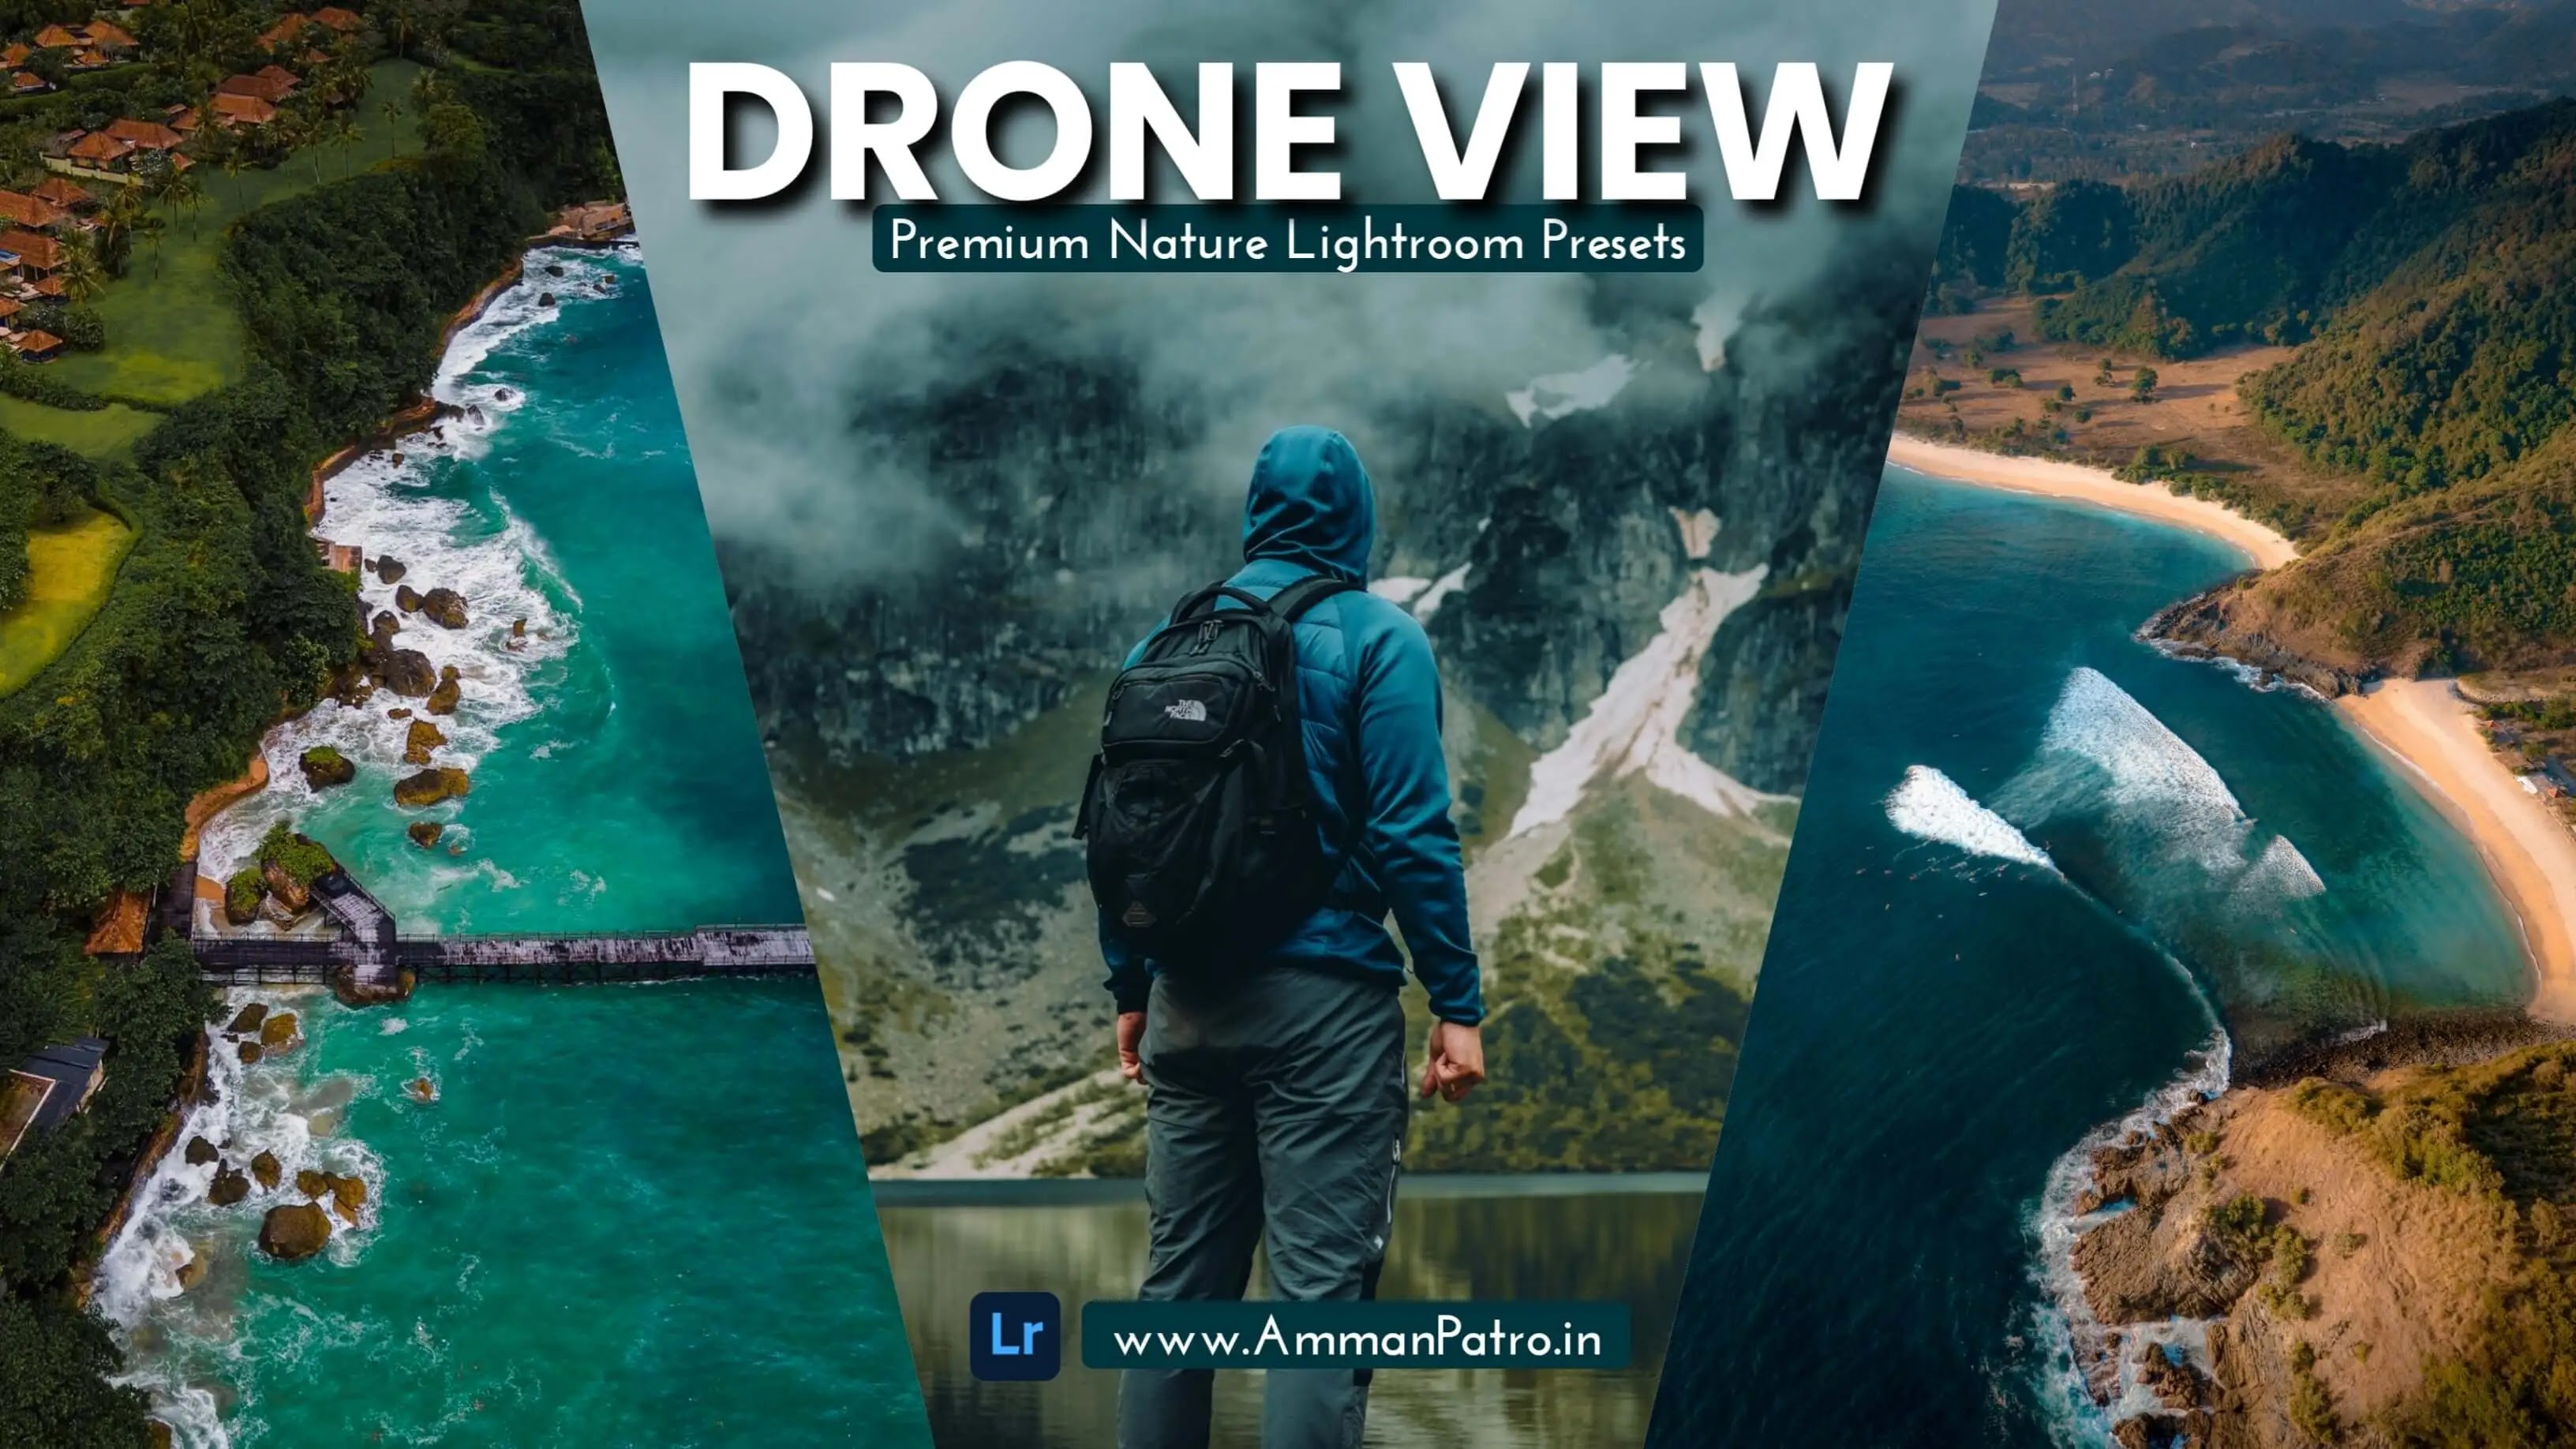 Drone View Lightroom Presets FREE Download, Aerial Nature Free Lightroom Presets, Free Lightroom Presets, Drone Nature Presets, Presets for Lightroom, Amman Patro, Amman Free Presets, Amman Lightroom Presets, Aman Presets, Amman Patro